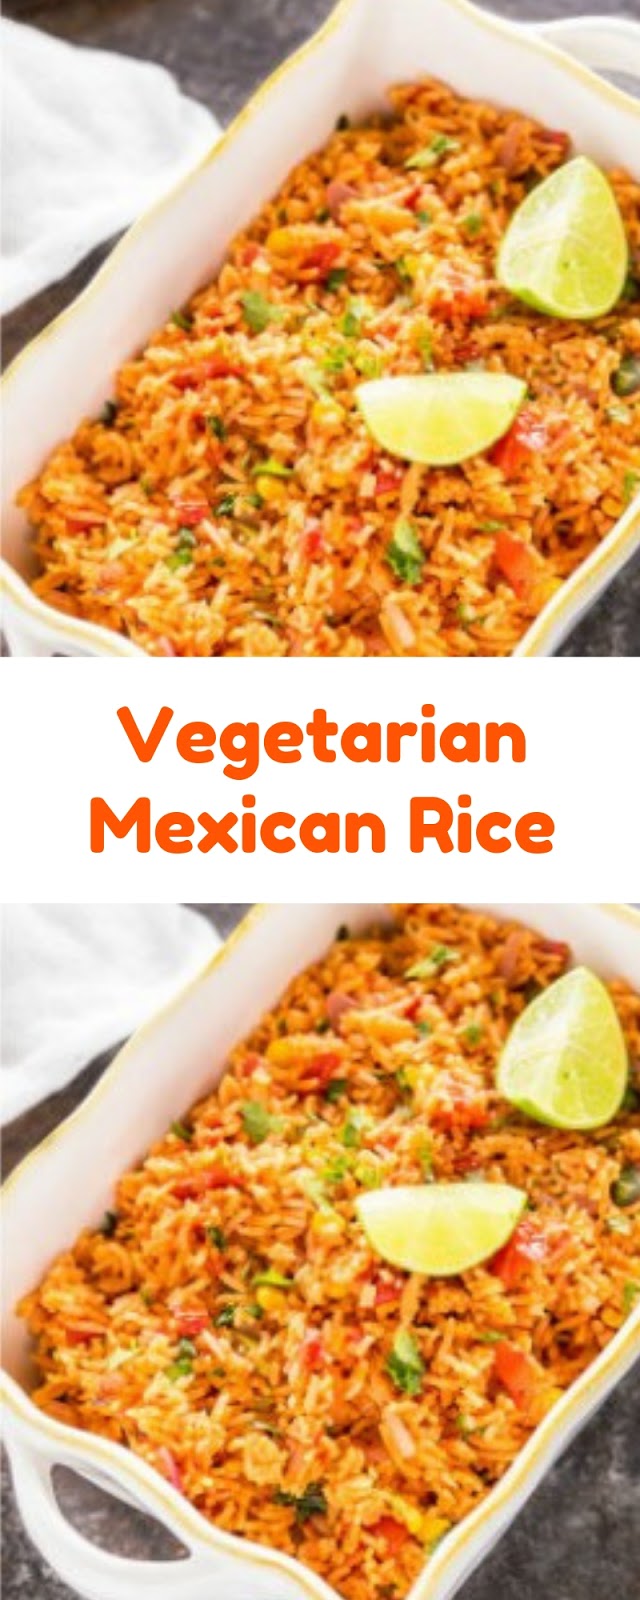 Amazing Vegetarian Mexican Rice